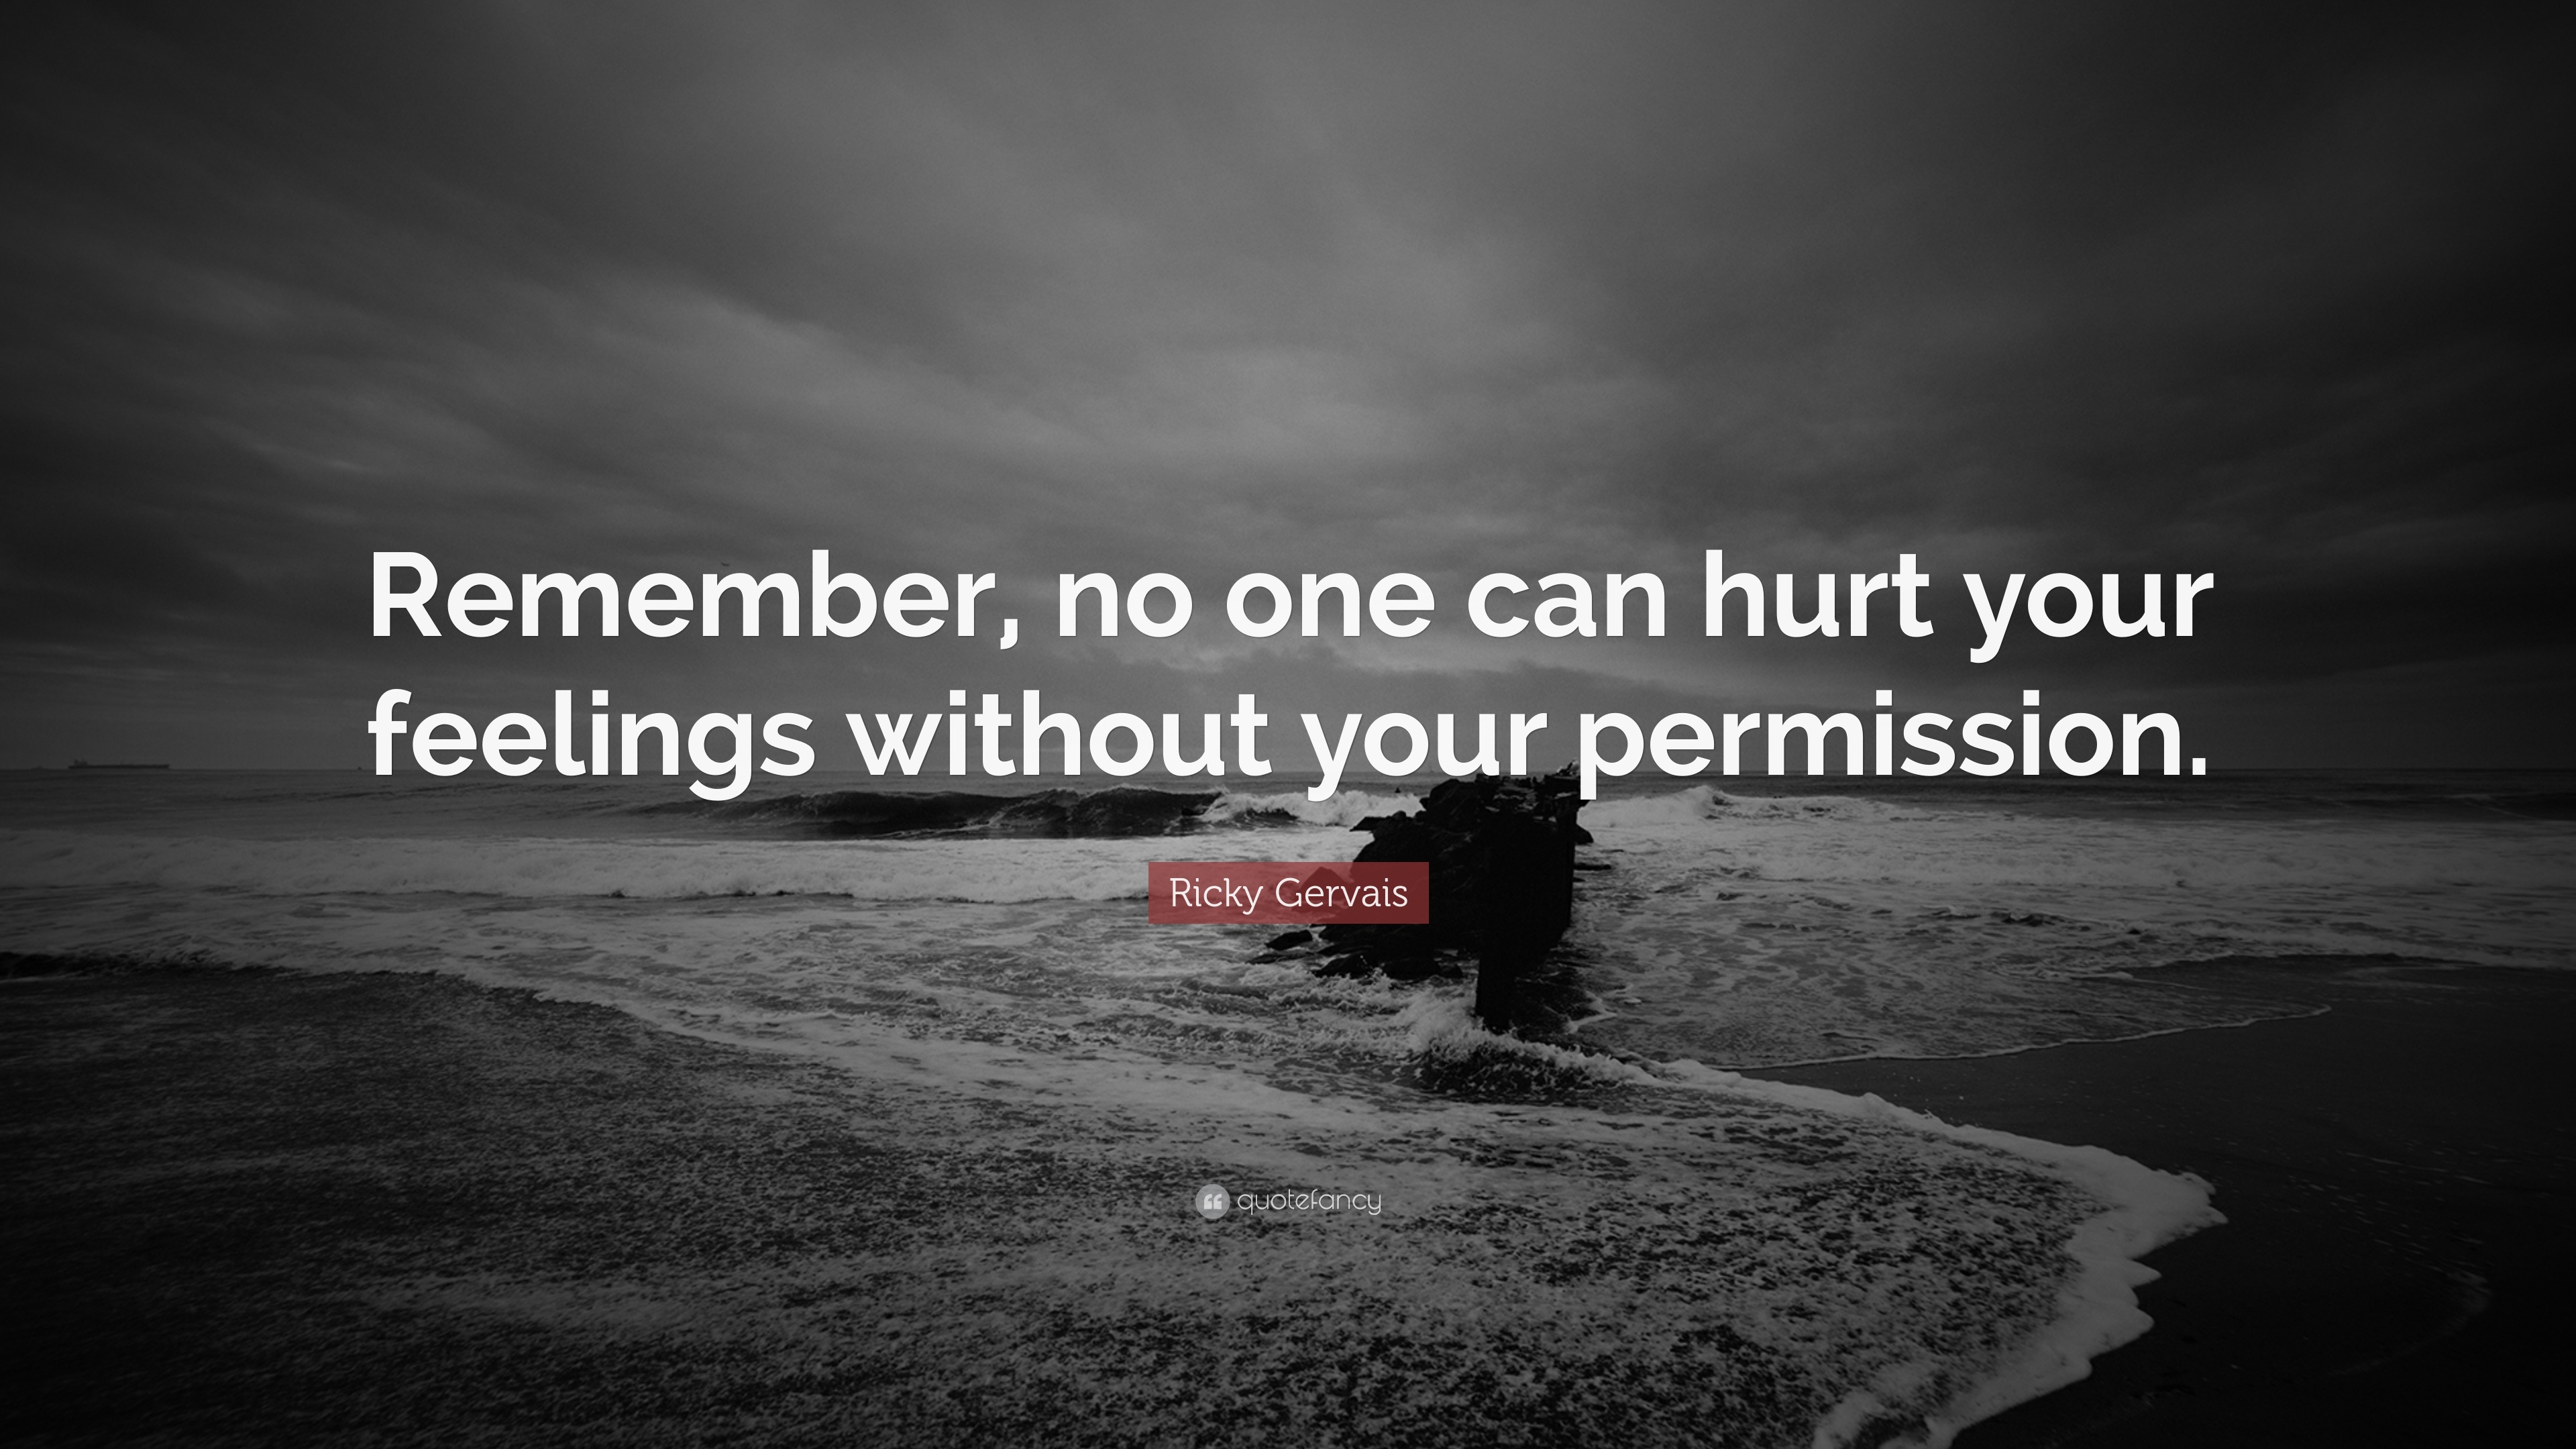 Ricky Gervais Quote: “Remember, no one can hurt your feelings without ...